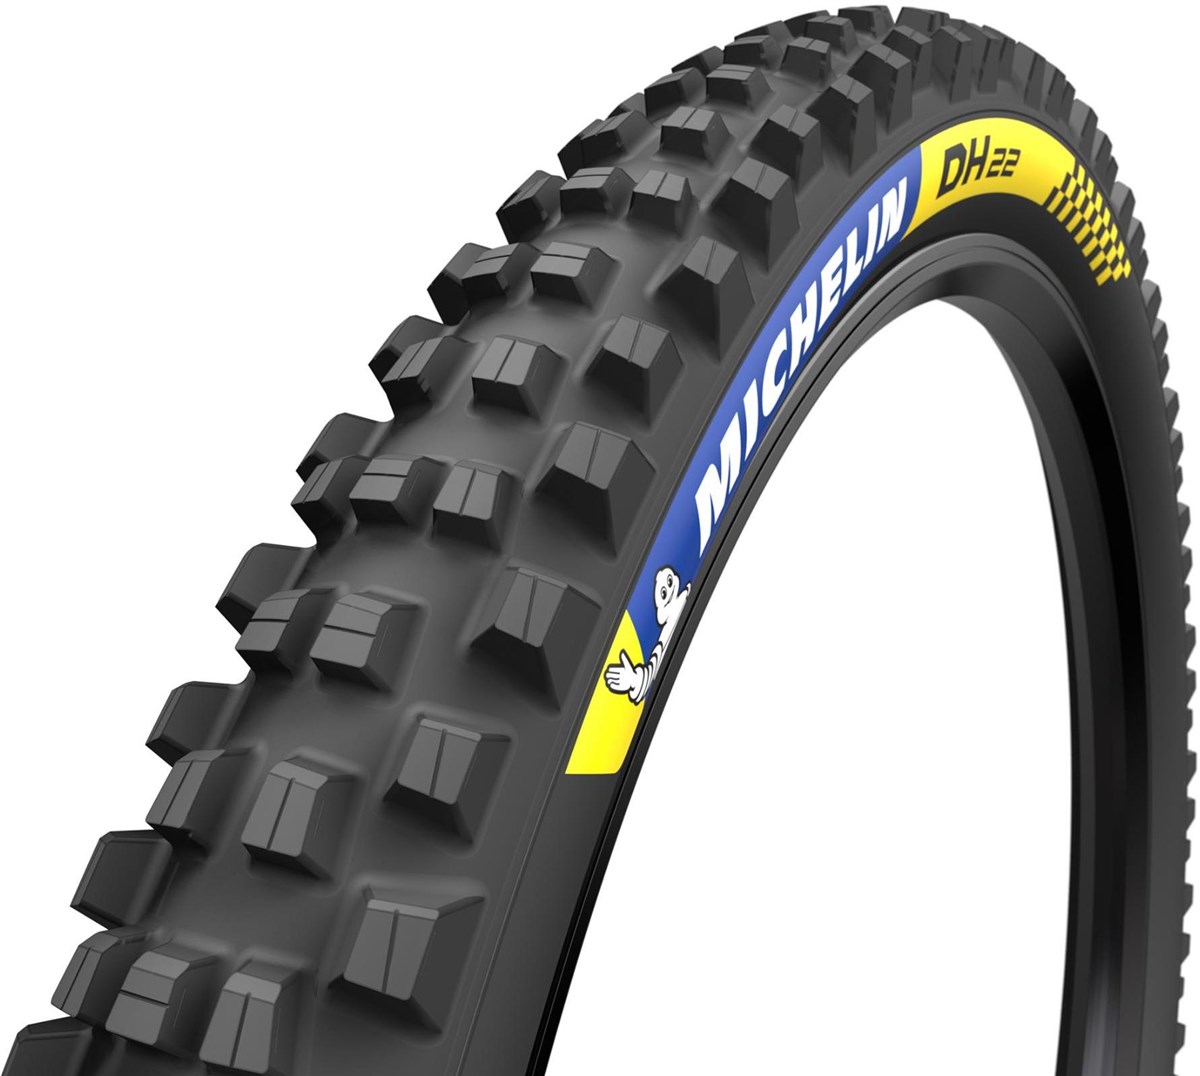 Michelin DH 22 27.5" Tubular Tyre product image